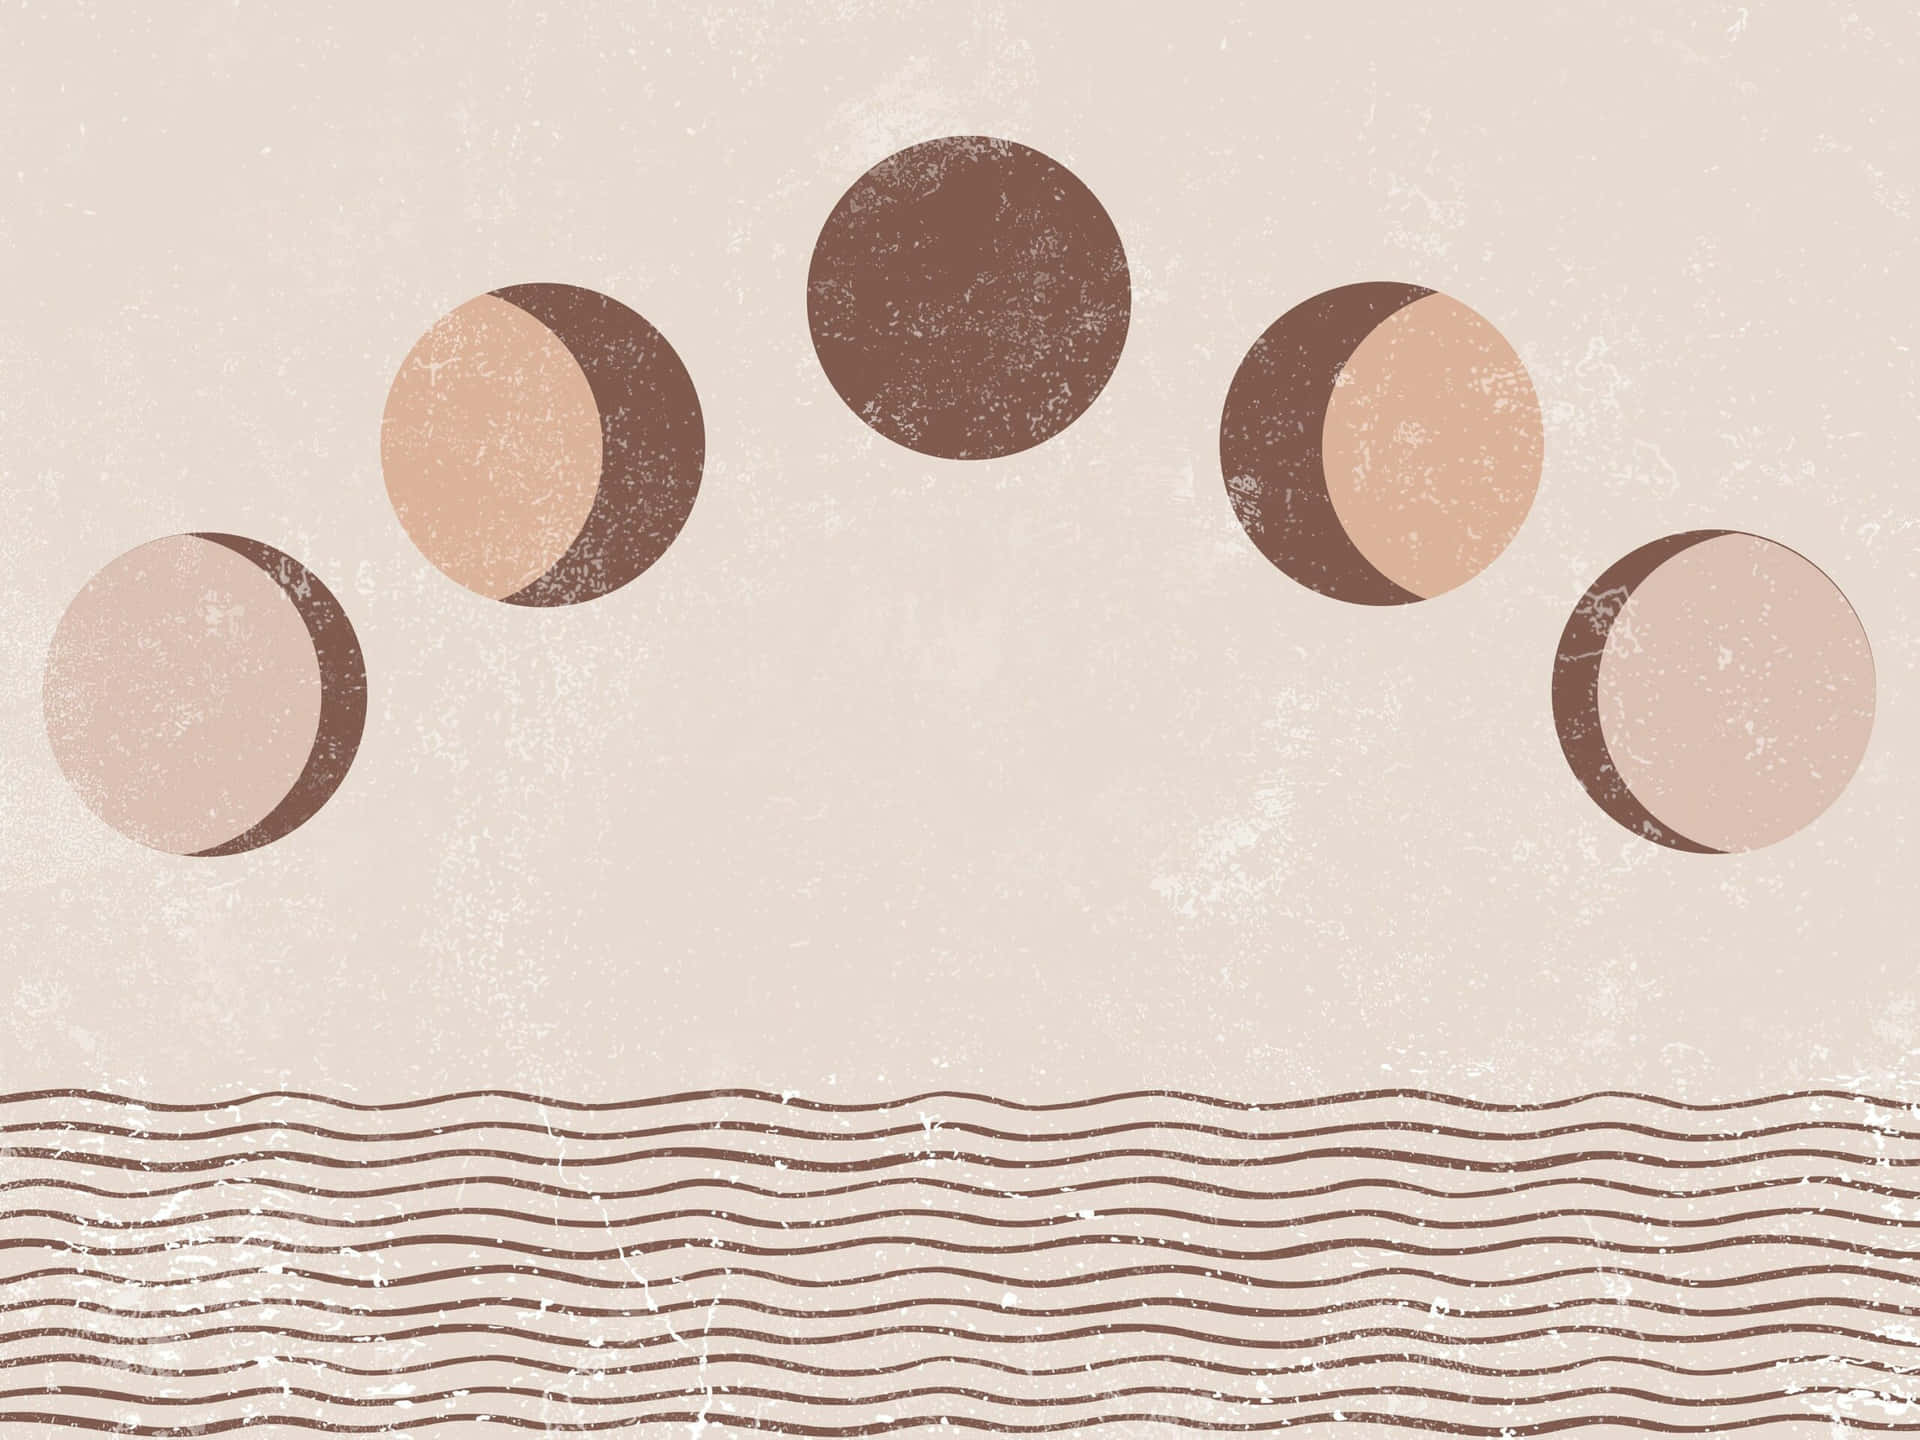 A Retro Illustration Of A Moon And Waves